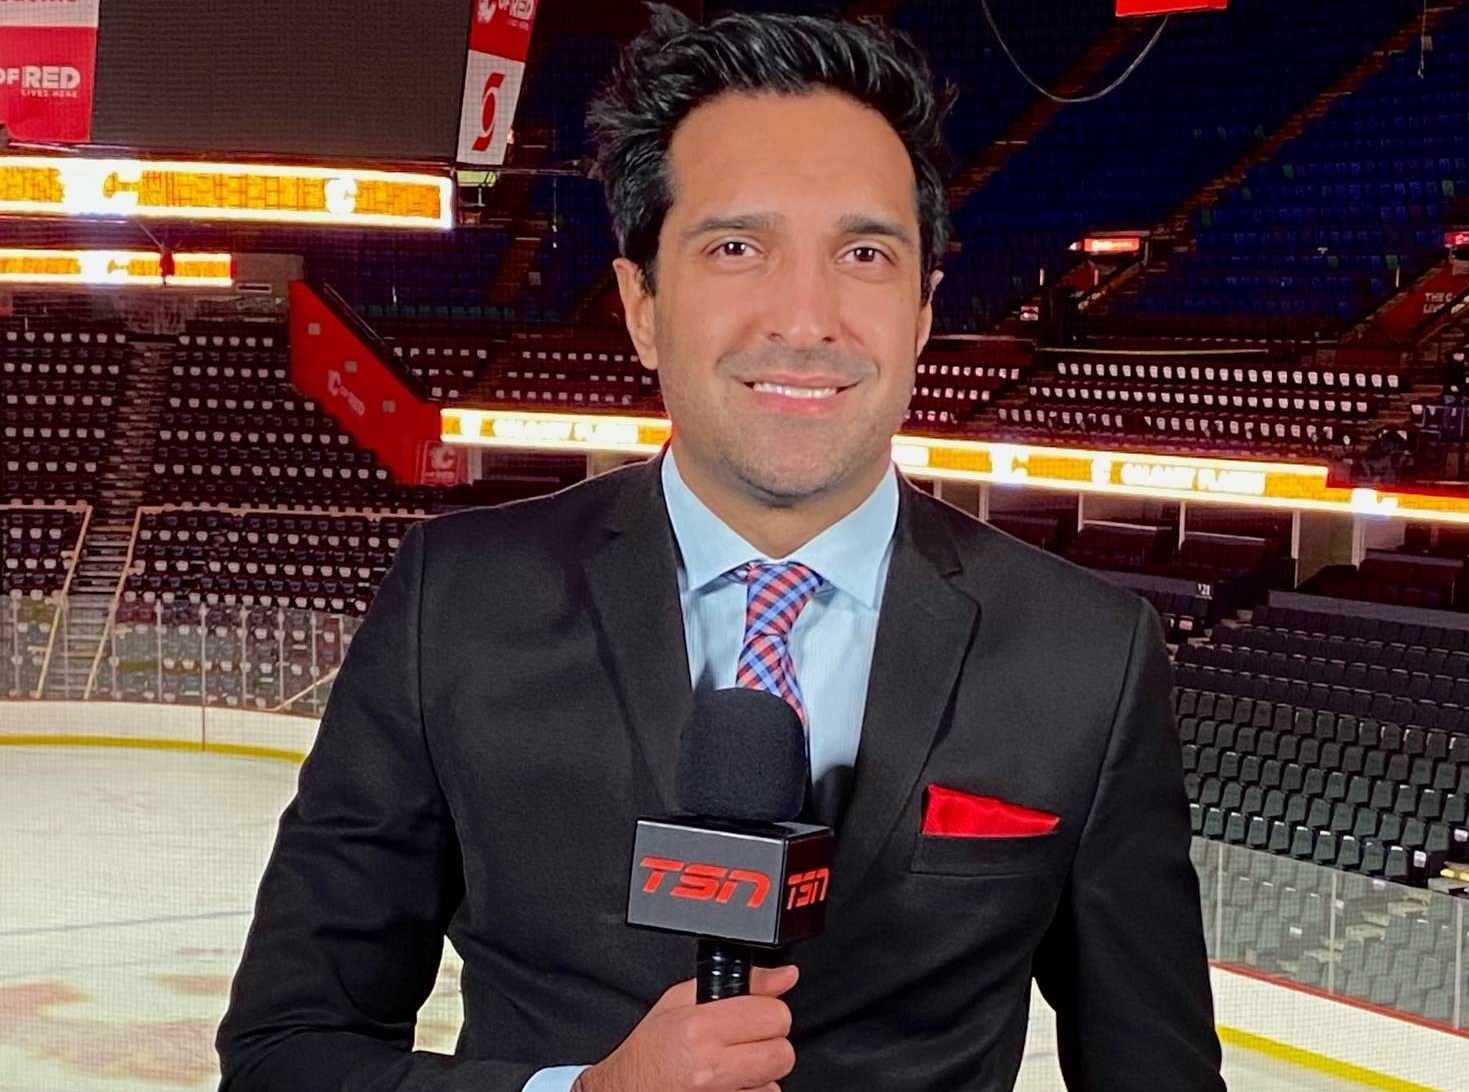 Salim Valji holds a microphone, reporting from a hockey game.